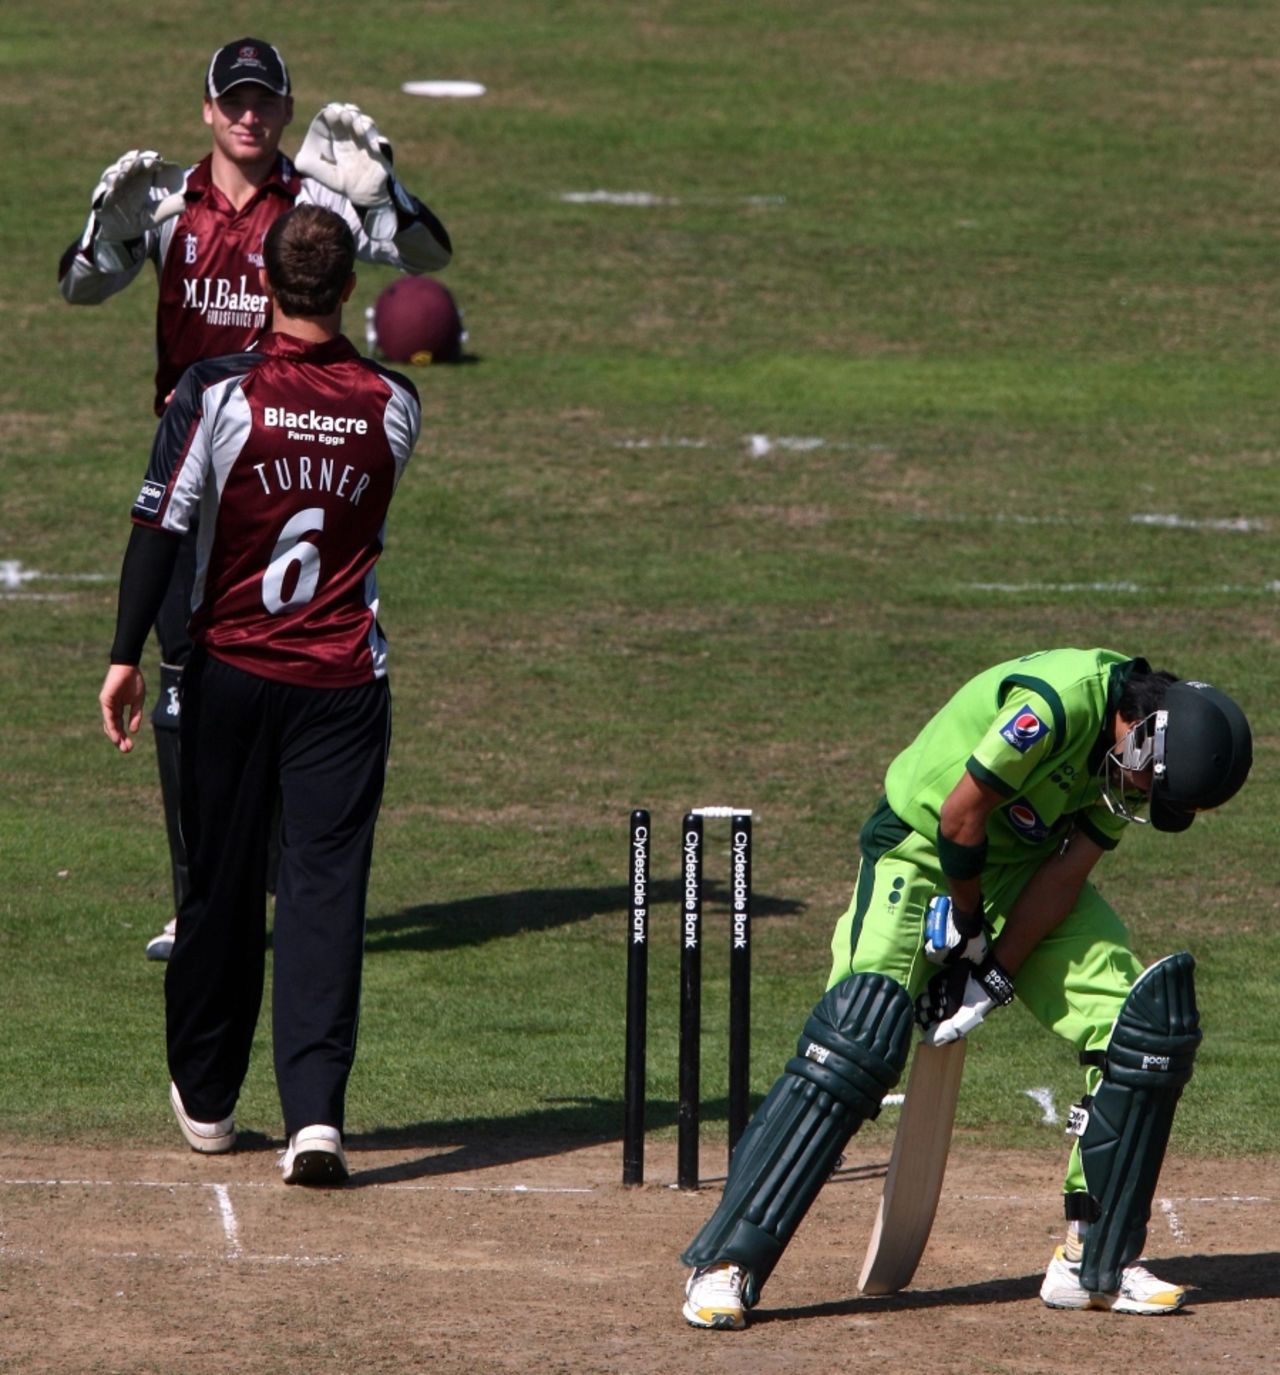 Fawad Alam played on to Mark Turner just three runs short of his hundred, Somerset v Pakistanis, Tour Match, Taunton, September 2 2010